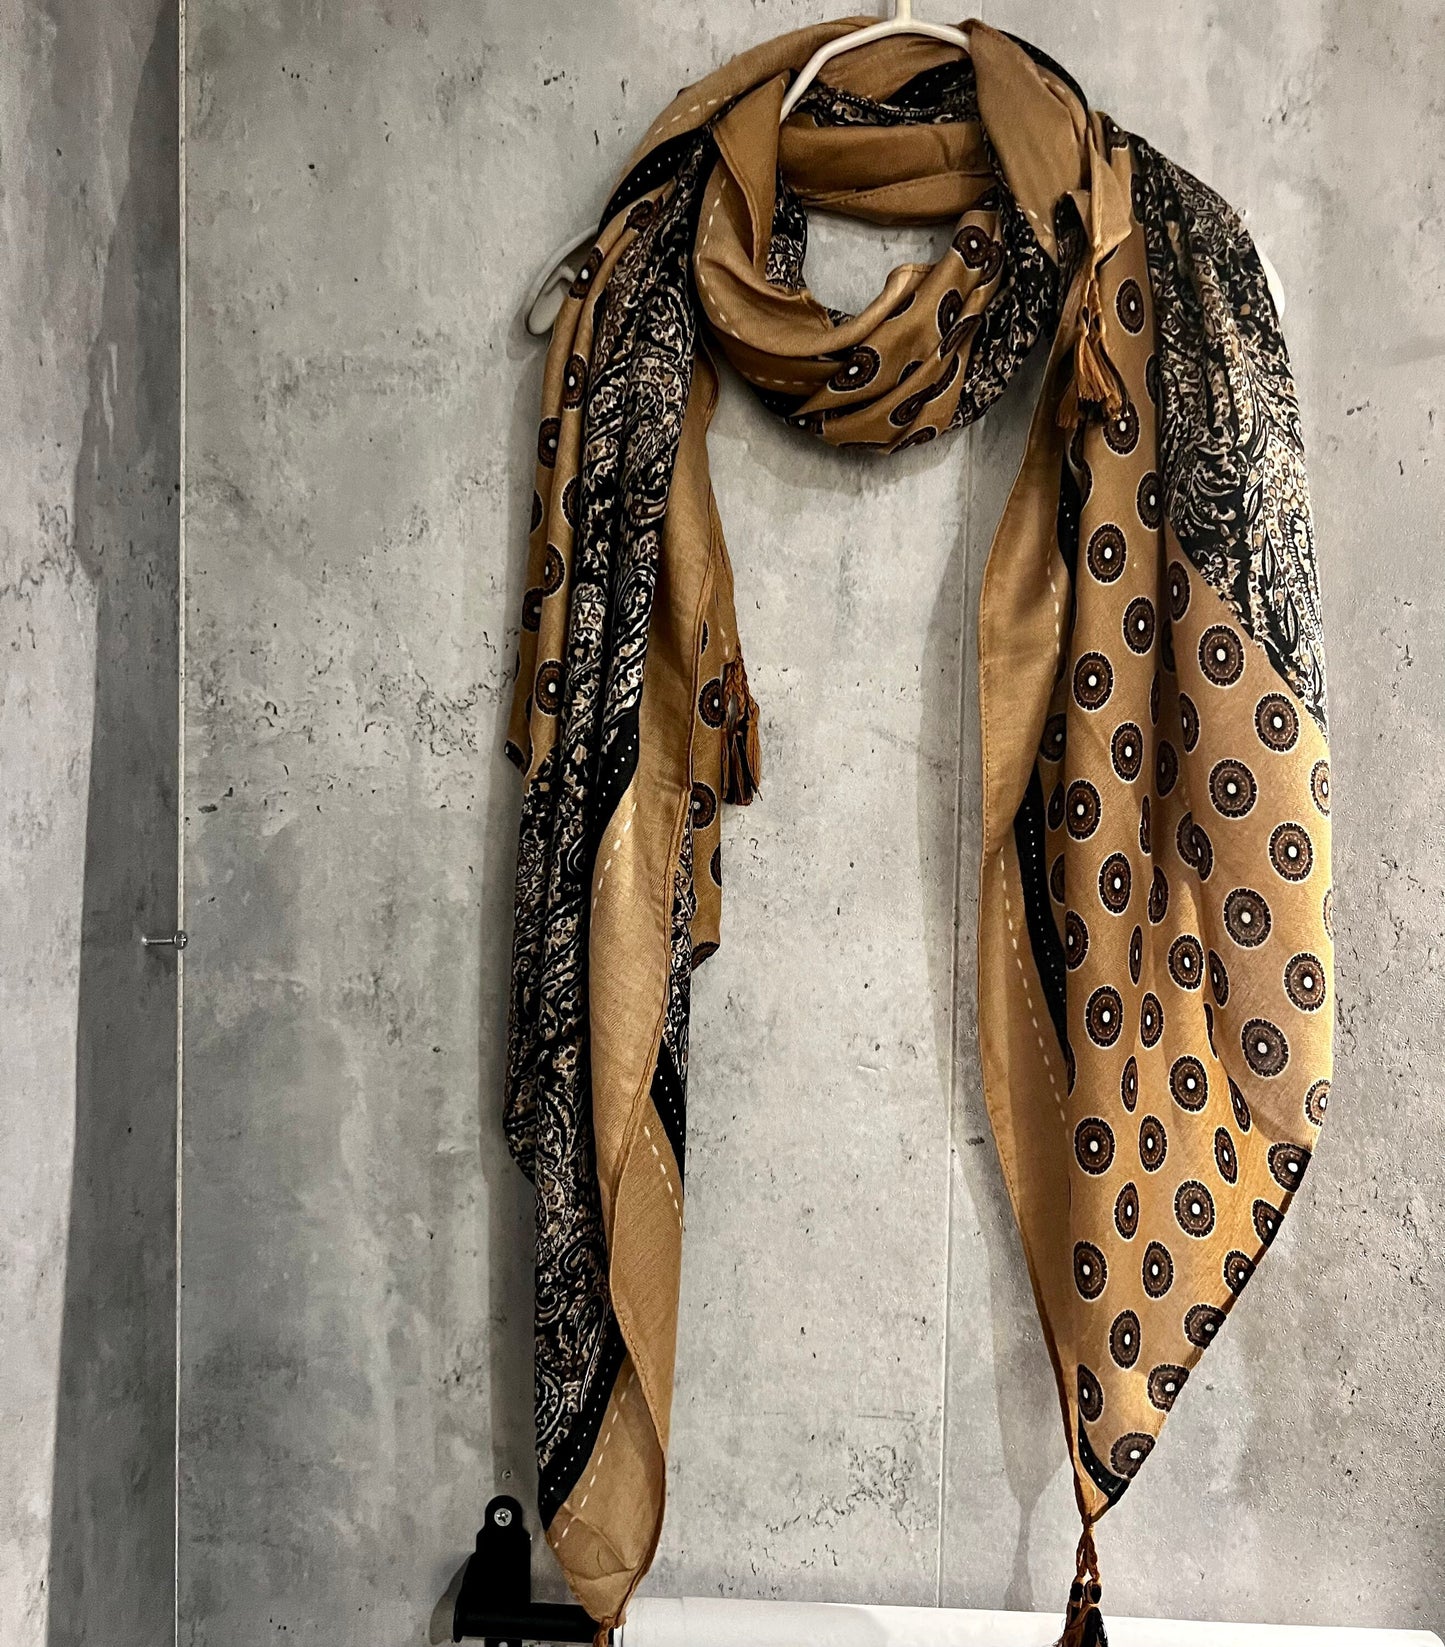 Modern Paisley With Tassels Brown Cotton Scarf/Summer Autumn Winter Scarf/Gifts For Mum/Gifts For Her Birthday Christmas/UK Seller